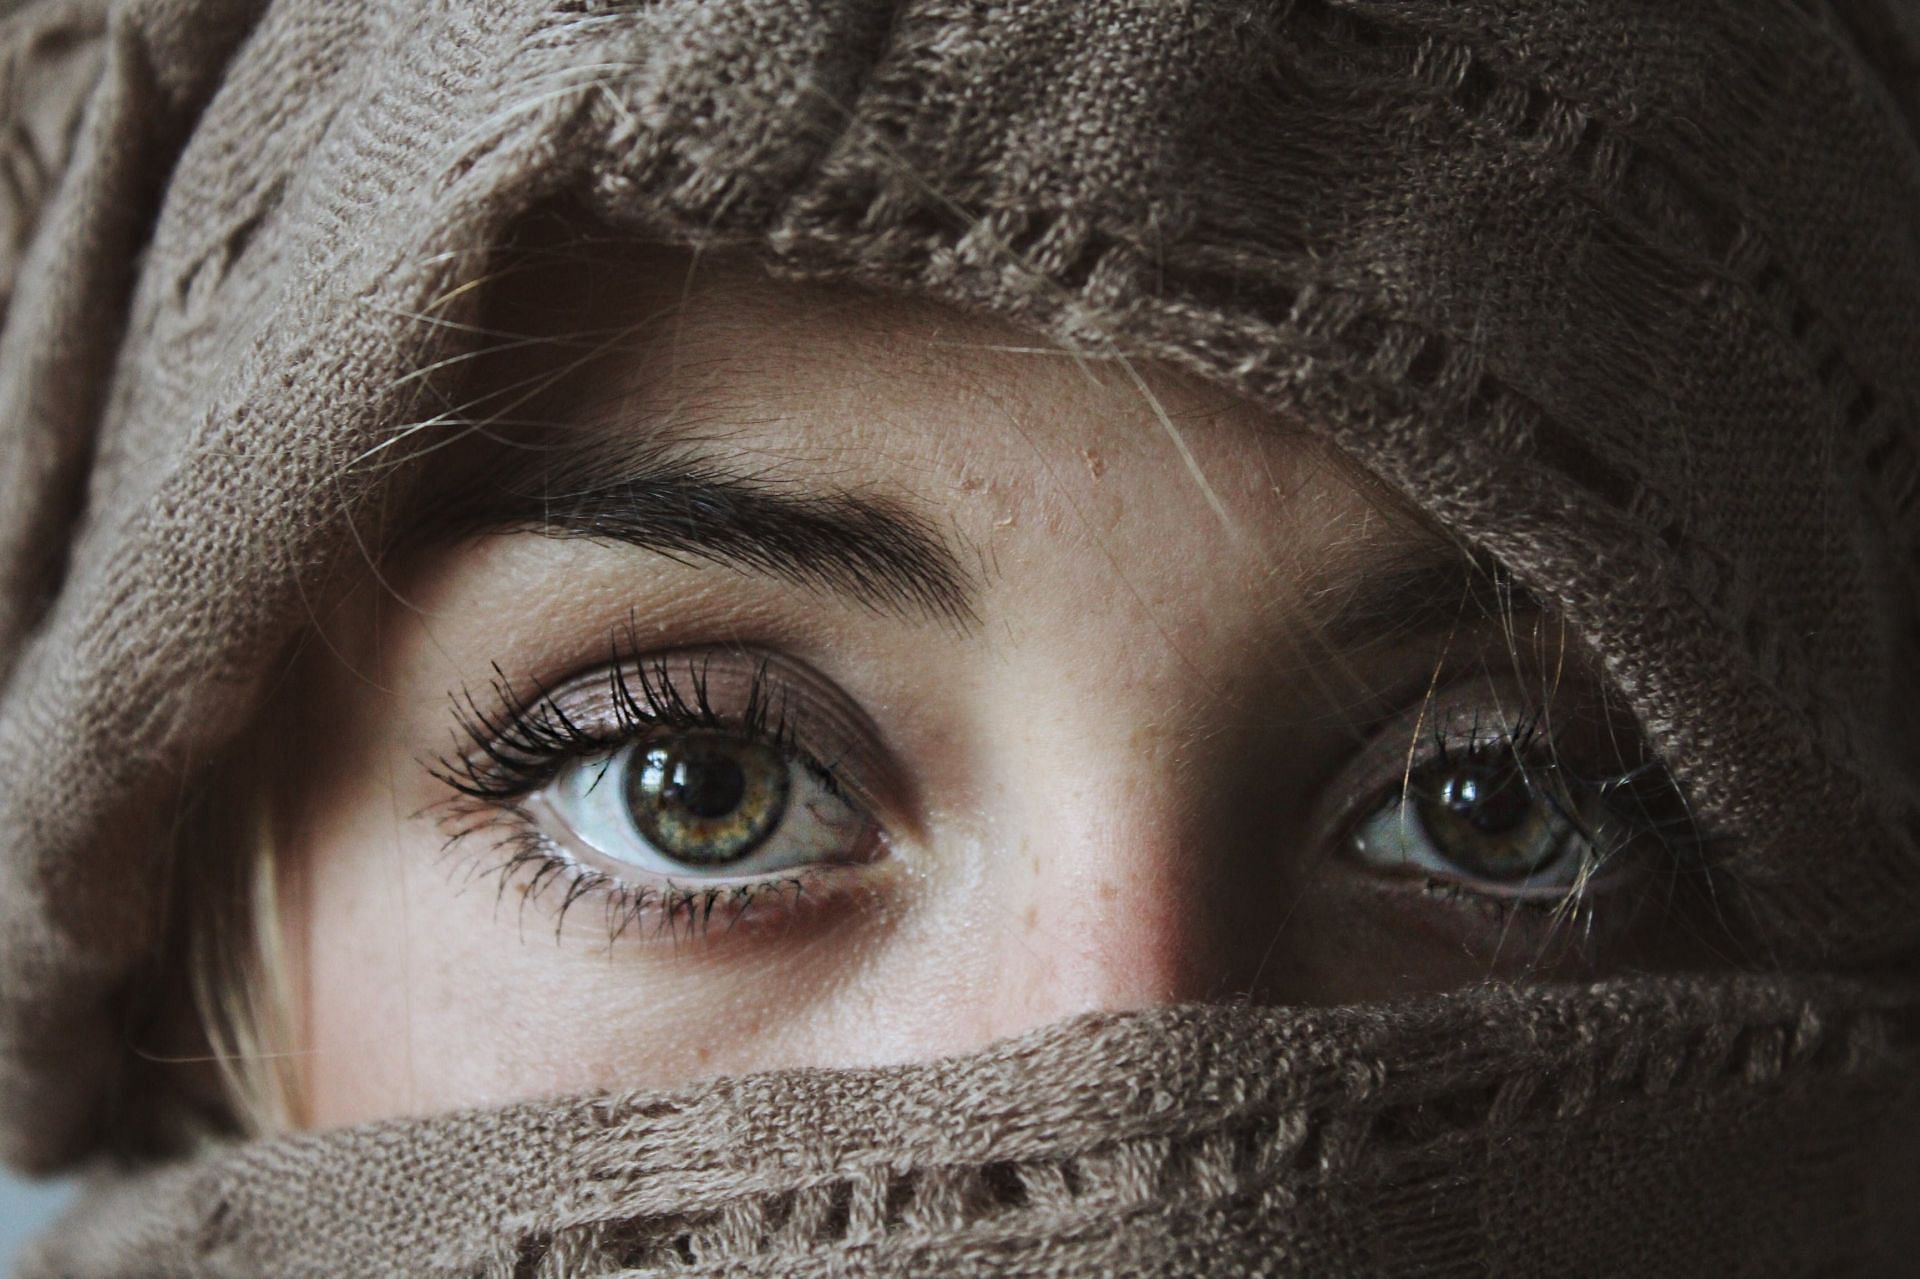 Benefits of home remedies for dry eyes (image sourced via Pexels / Photo by noelle)